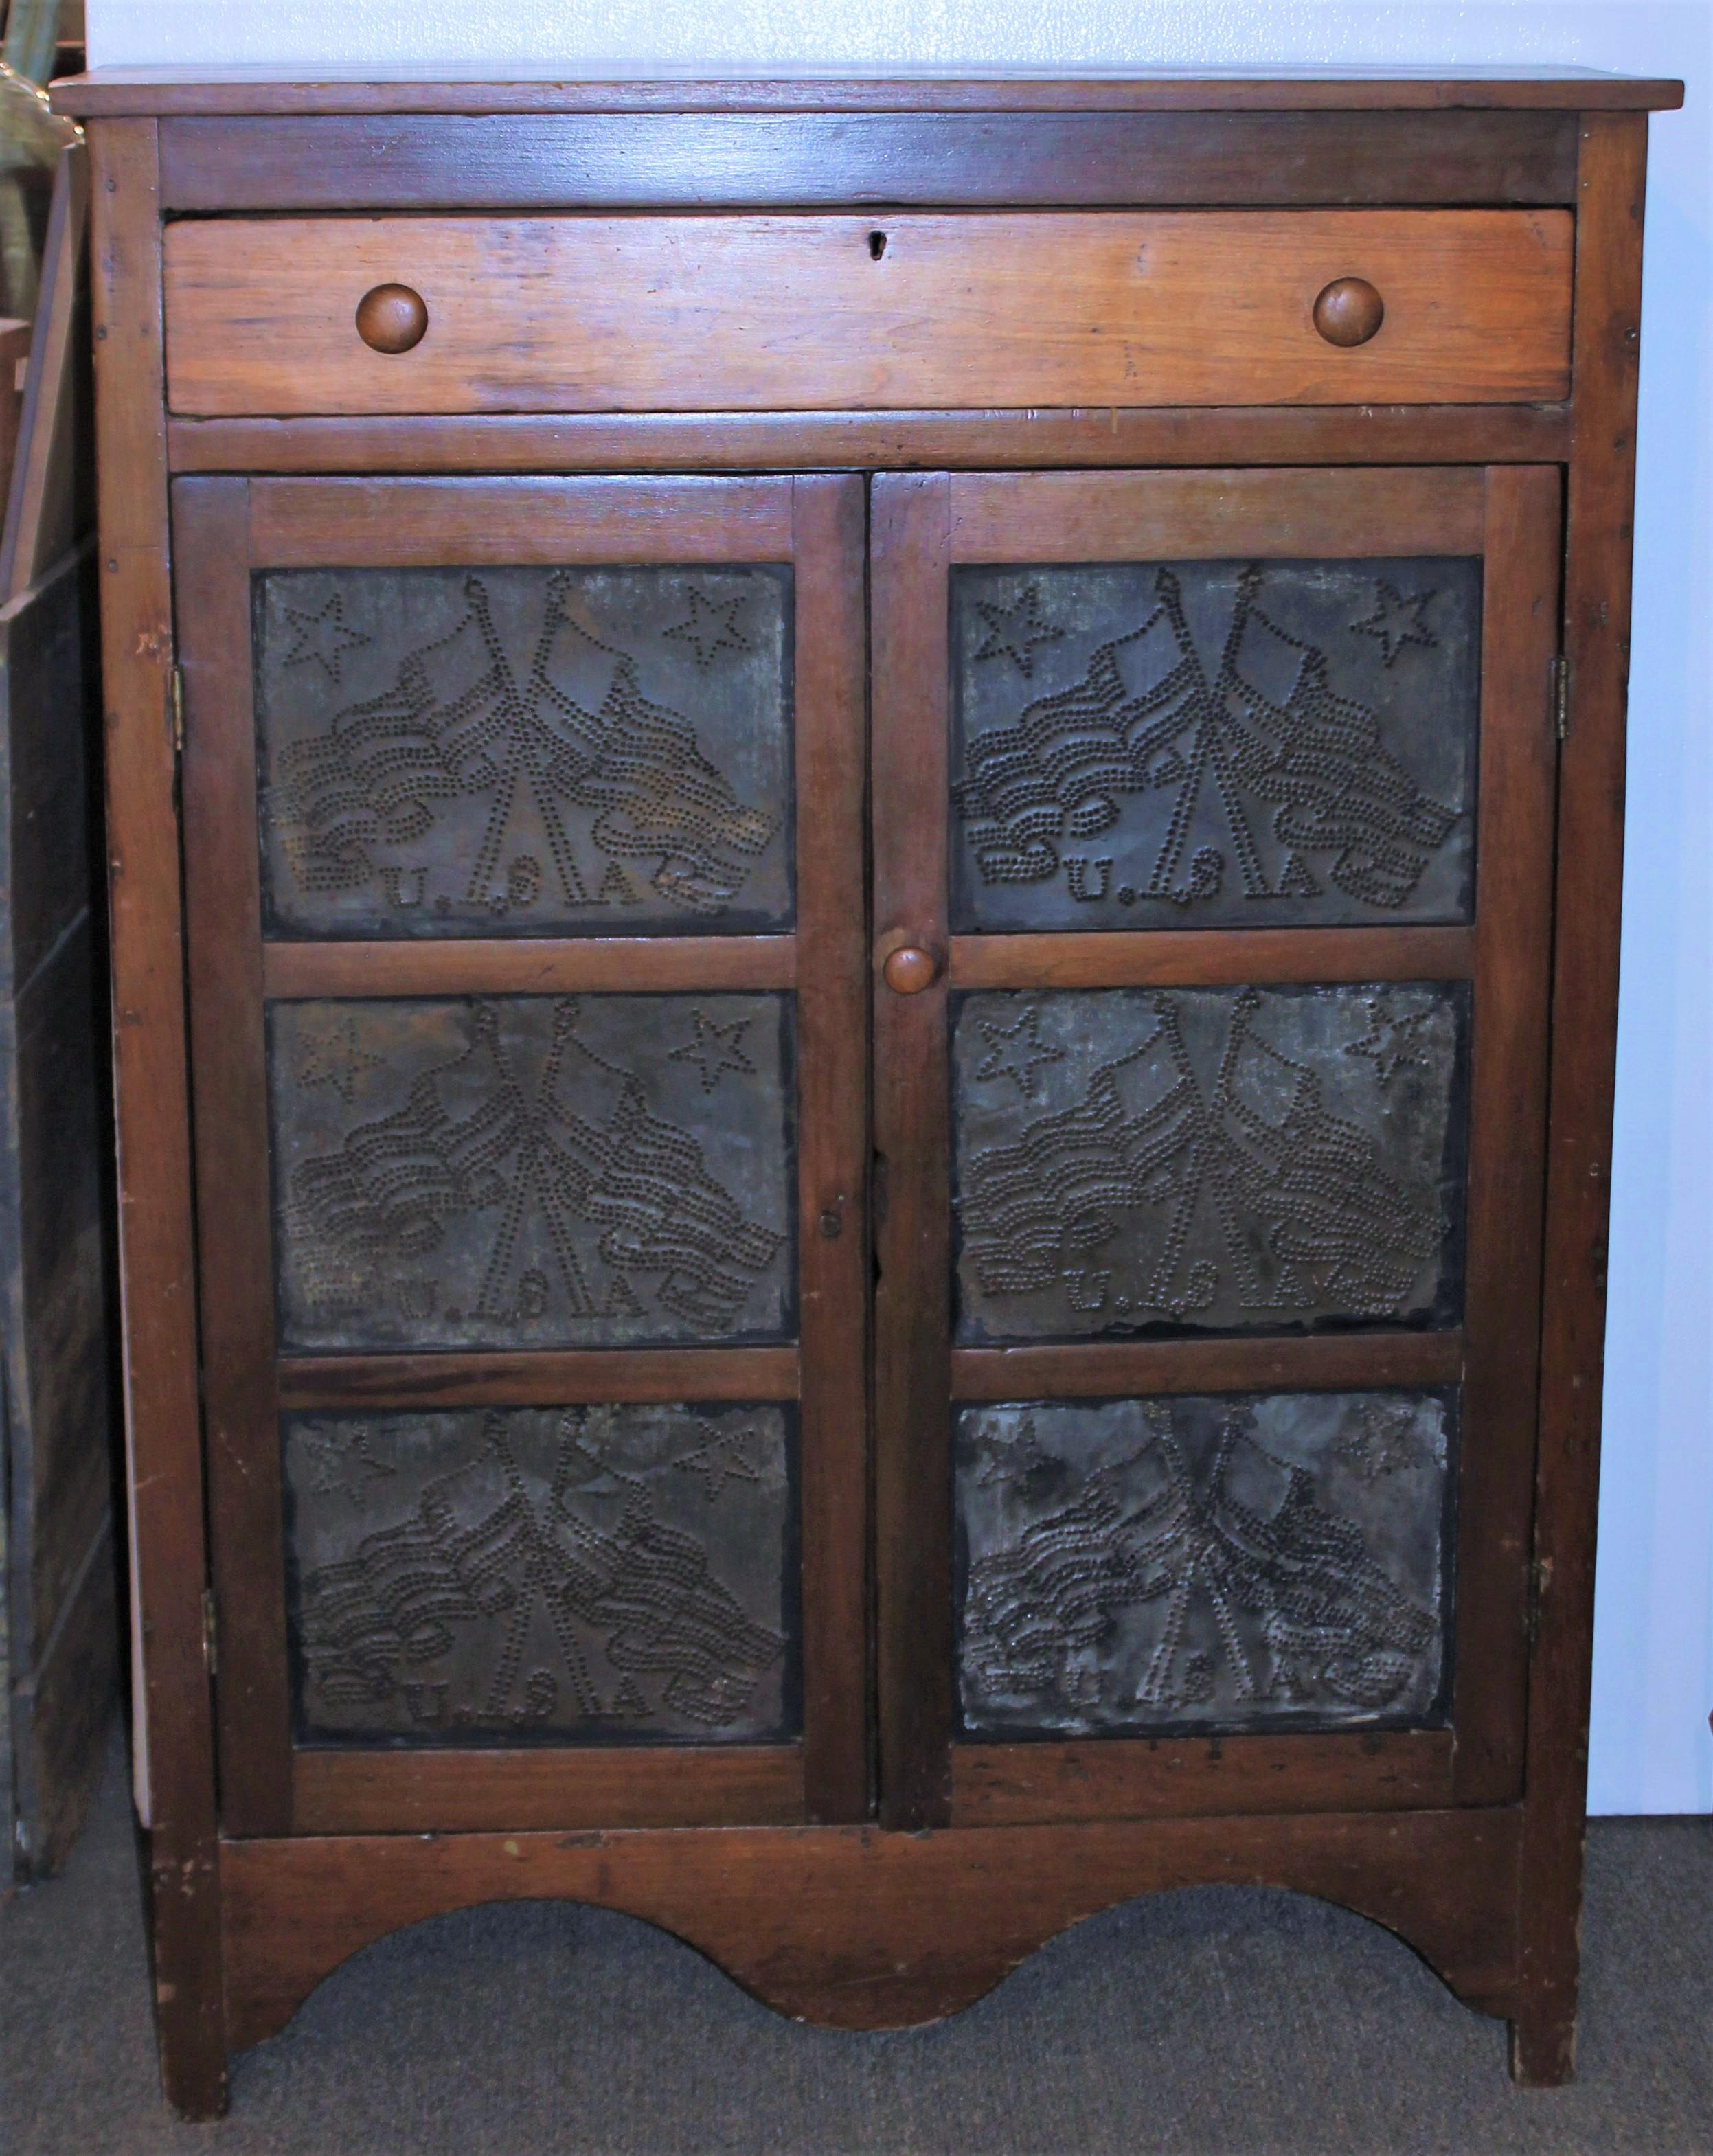 19th c punched tins cross flags pie safe all original and a natural old surface. This safe was found in East Tennessee and is in fine condition. The condition is very good and it is in working order. At one time this was probably painted and is in a